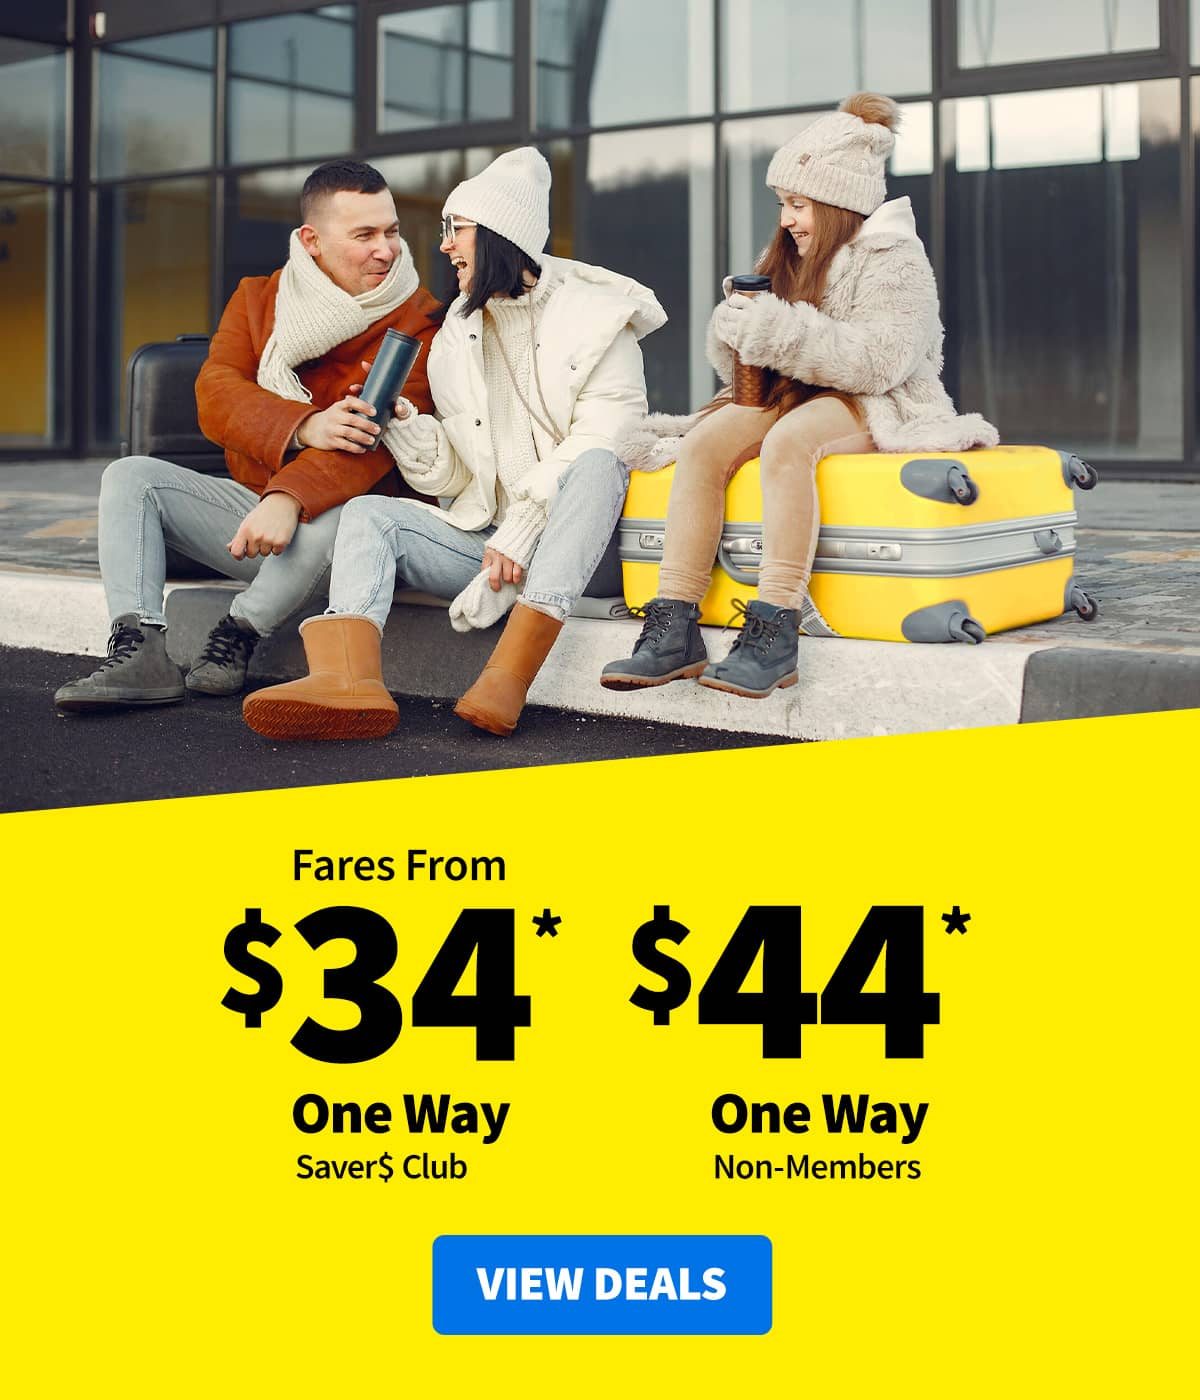 Fares from $34* One Way for Saver$ Club Members or $44* One Way for Non-Members